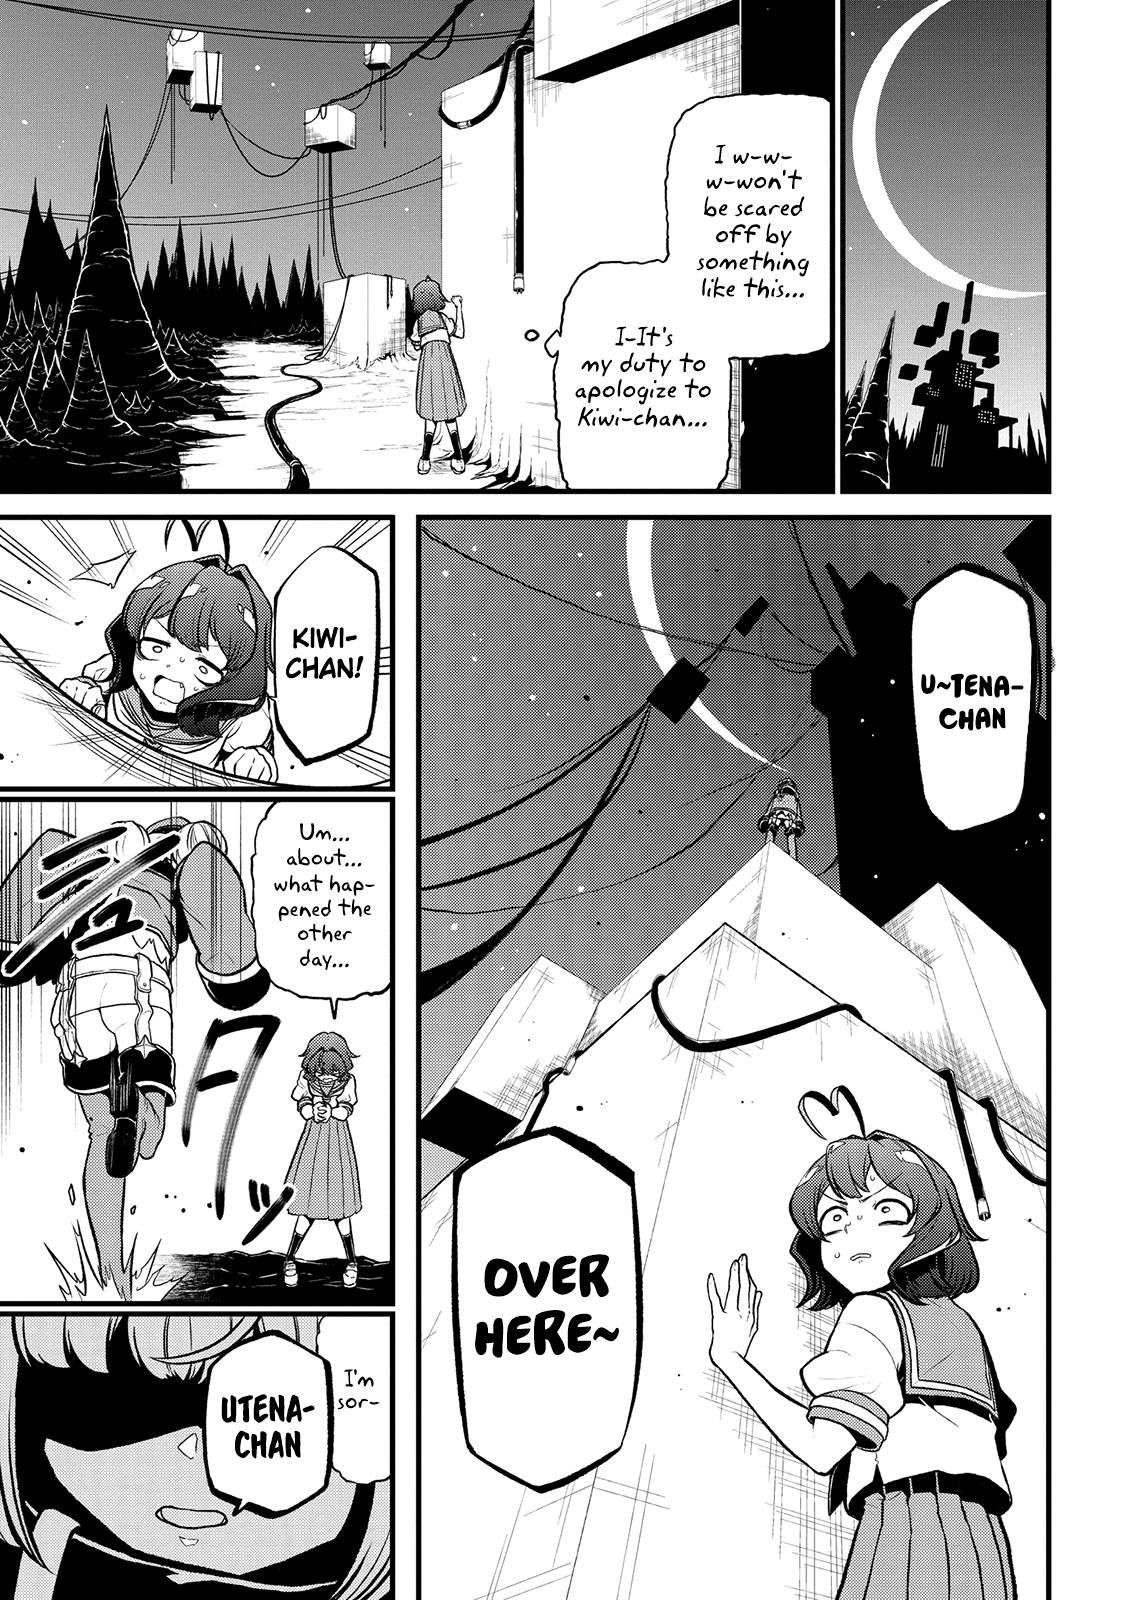 Gushing over Magical Girls - chapter 27 - #5